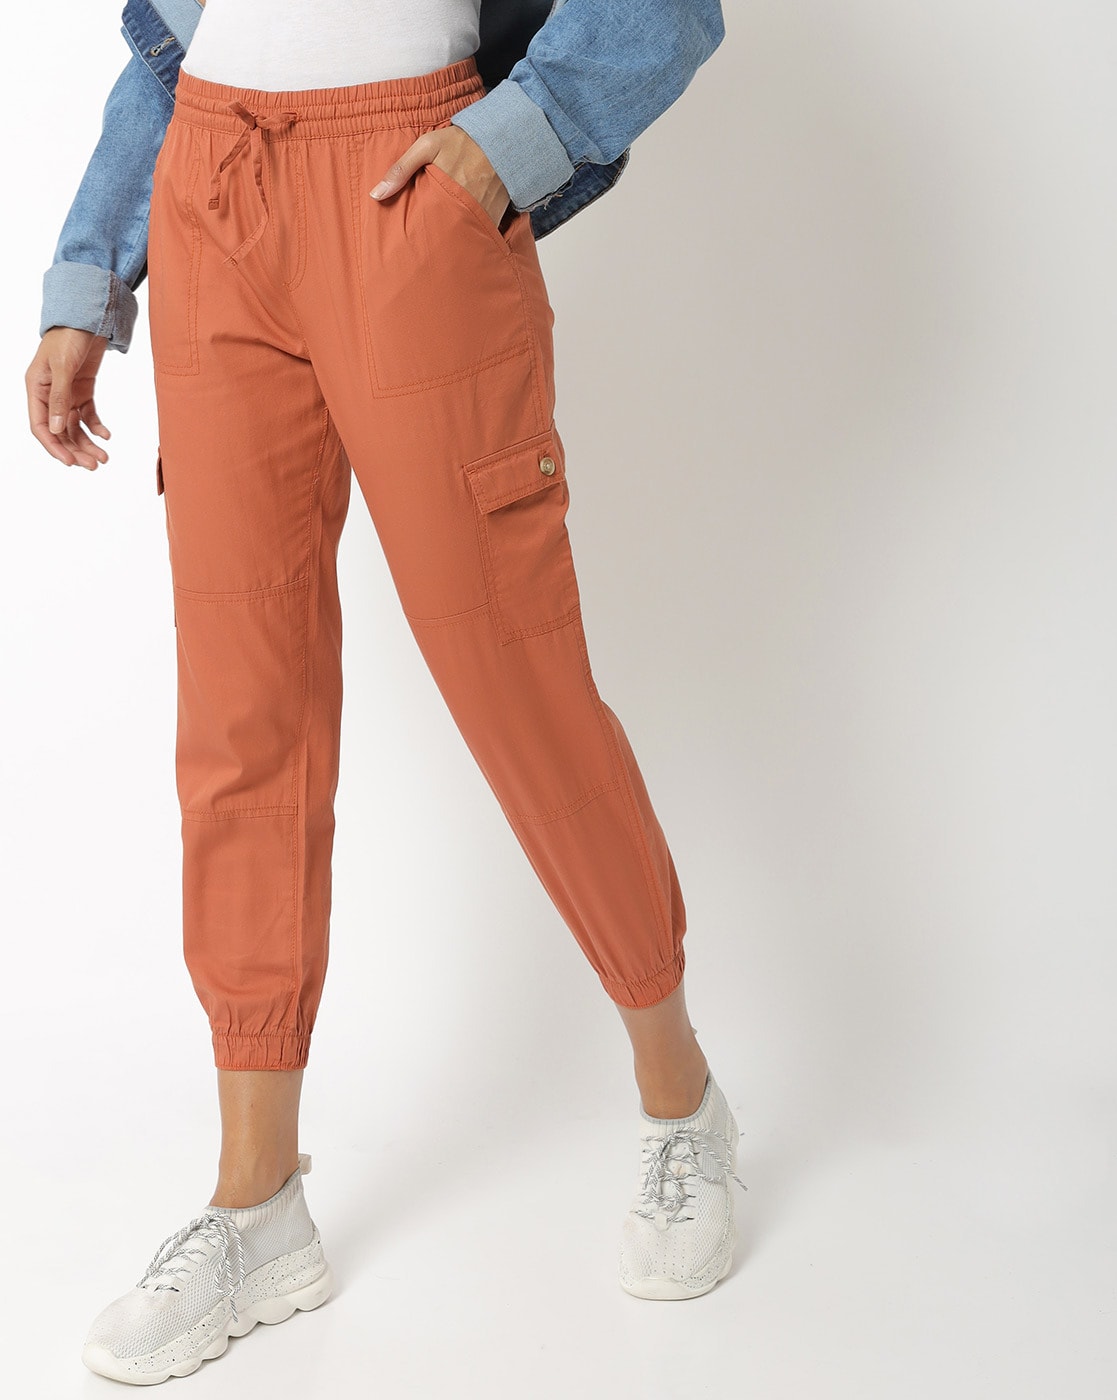 Update more than 73 coral crop pants latest